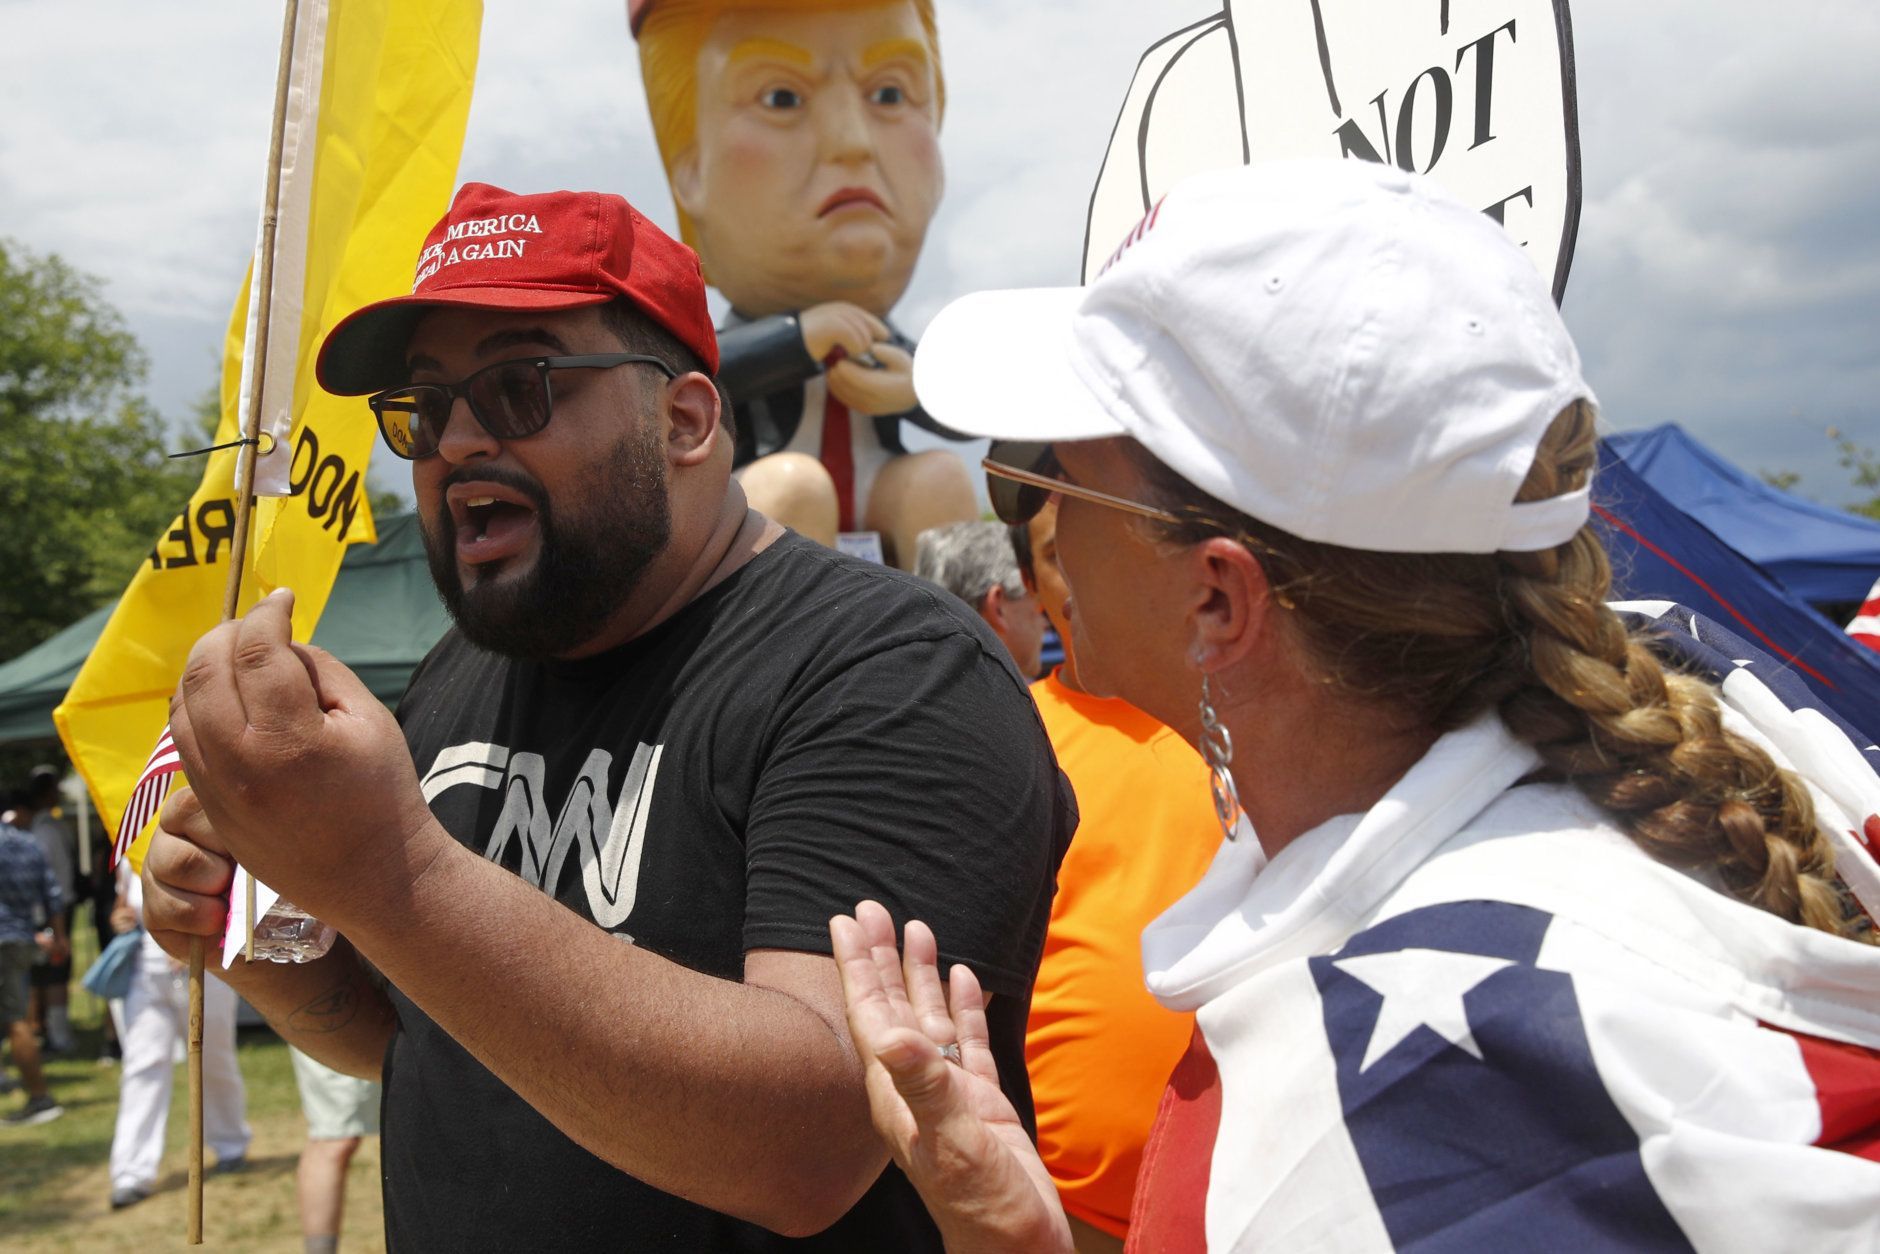 A supporter of President Donald Trump who gave his name as Moto Moto, left, of Brooklyn, N.Y., debates with protesters in front of a sculpture of President Trump holding a cell phone while sitting on a toilet before Independence Day celebrations, Thursday, July 4, 2019, on the National Mall in Washington. (AP Photo/Patrick Semansky)